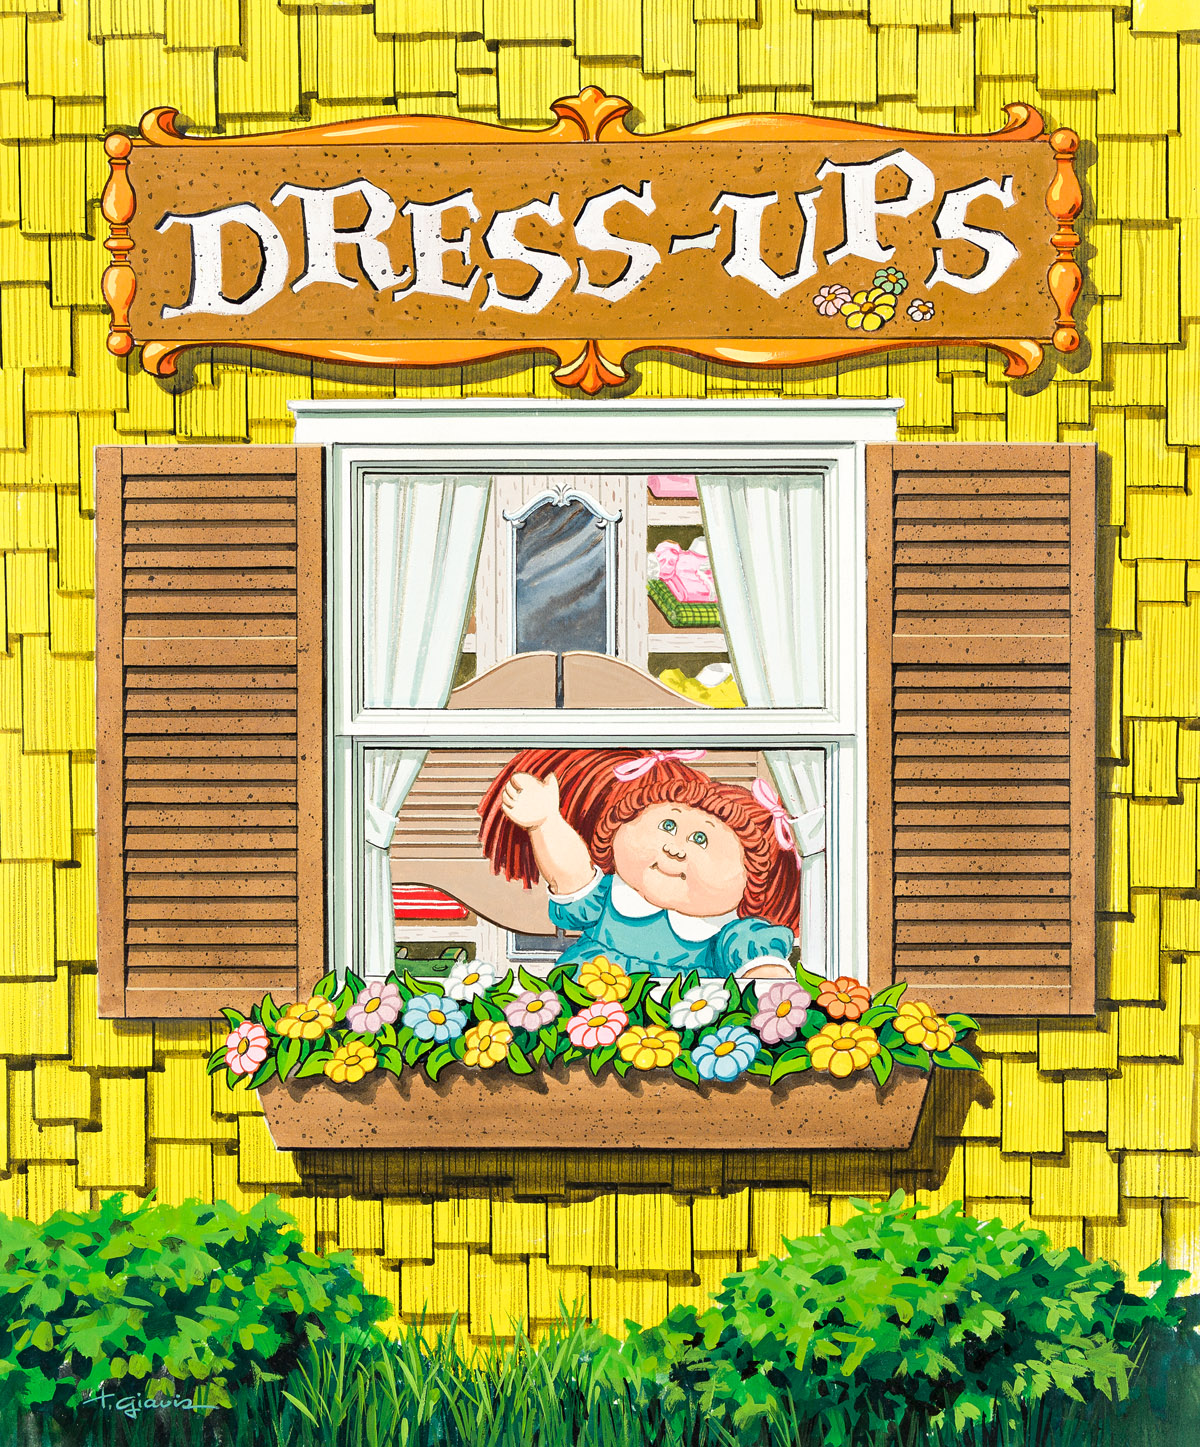 (CABBAGE PATCH KIDS) TED GIAVIS (1920-2008) Cabbage Patch Kids “Dress-Ups” package design.